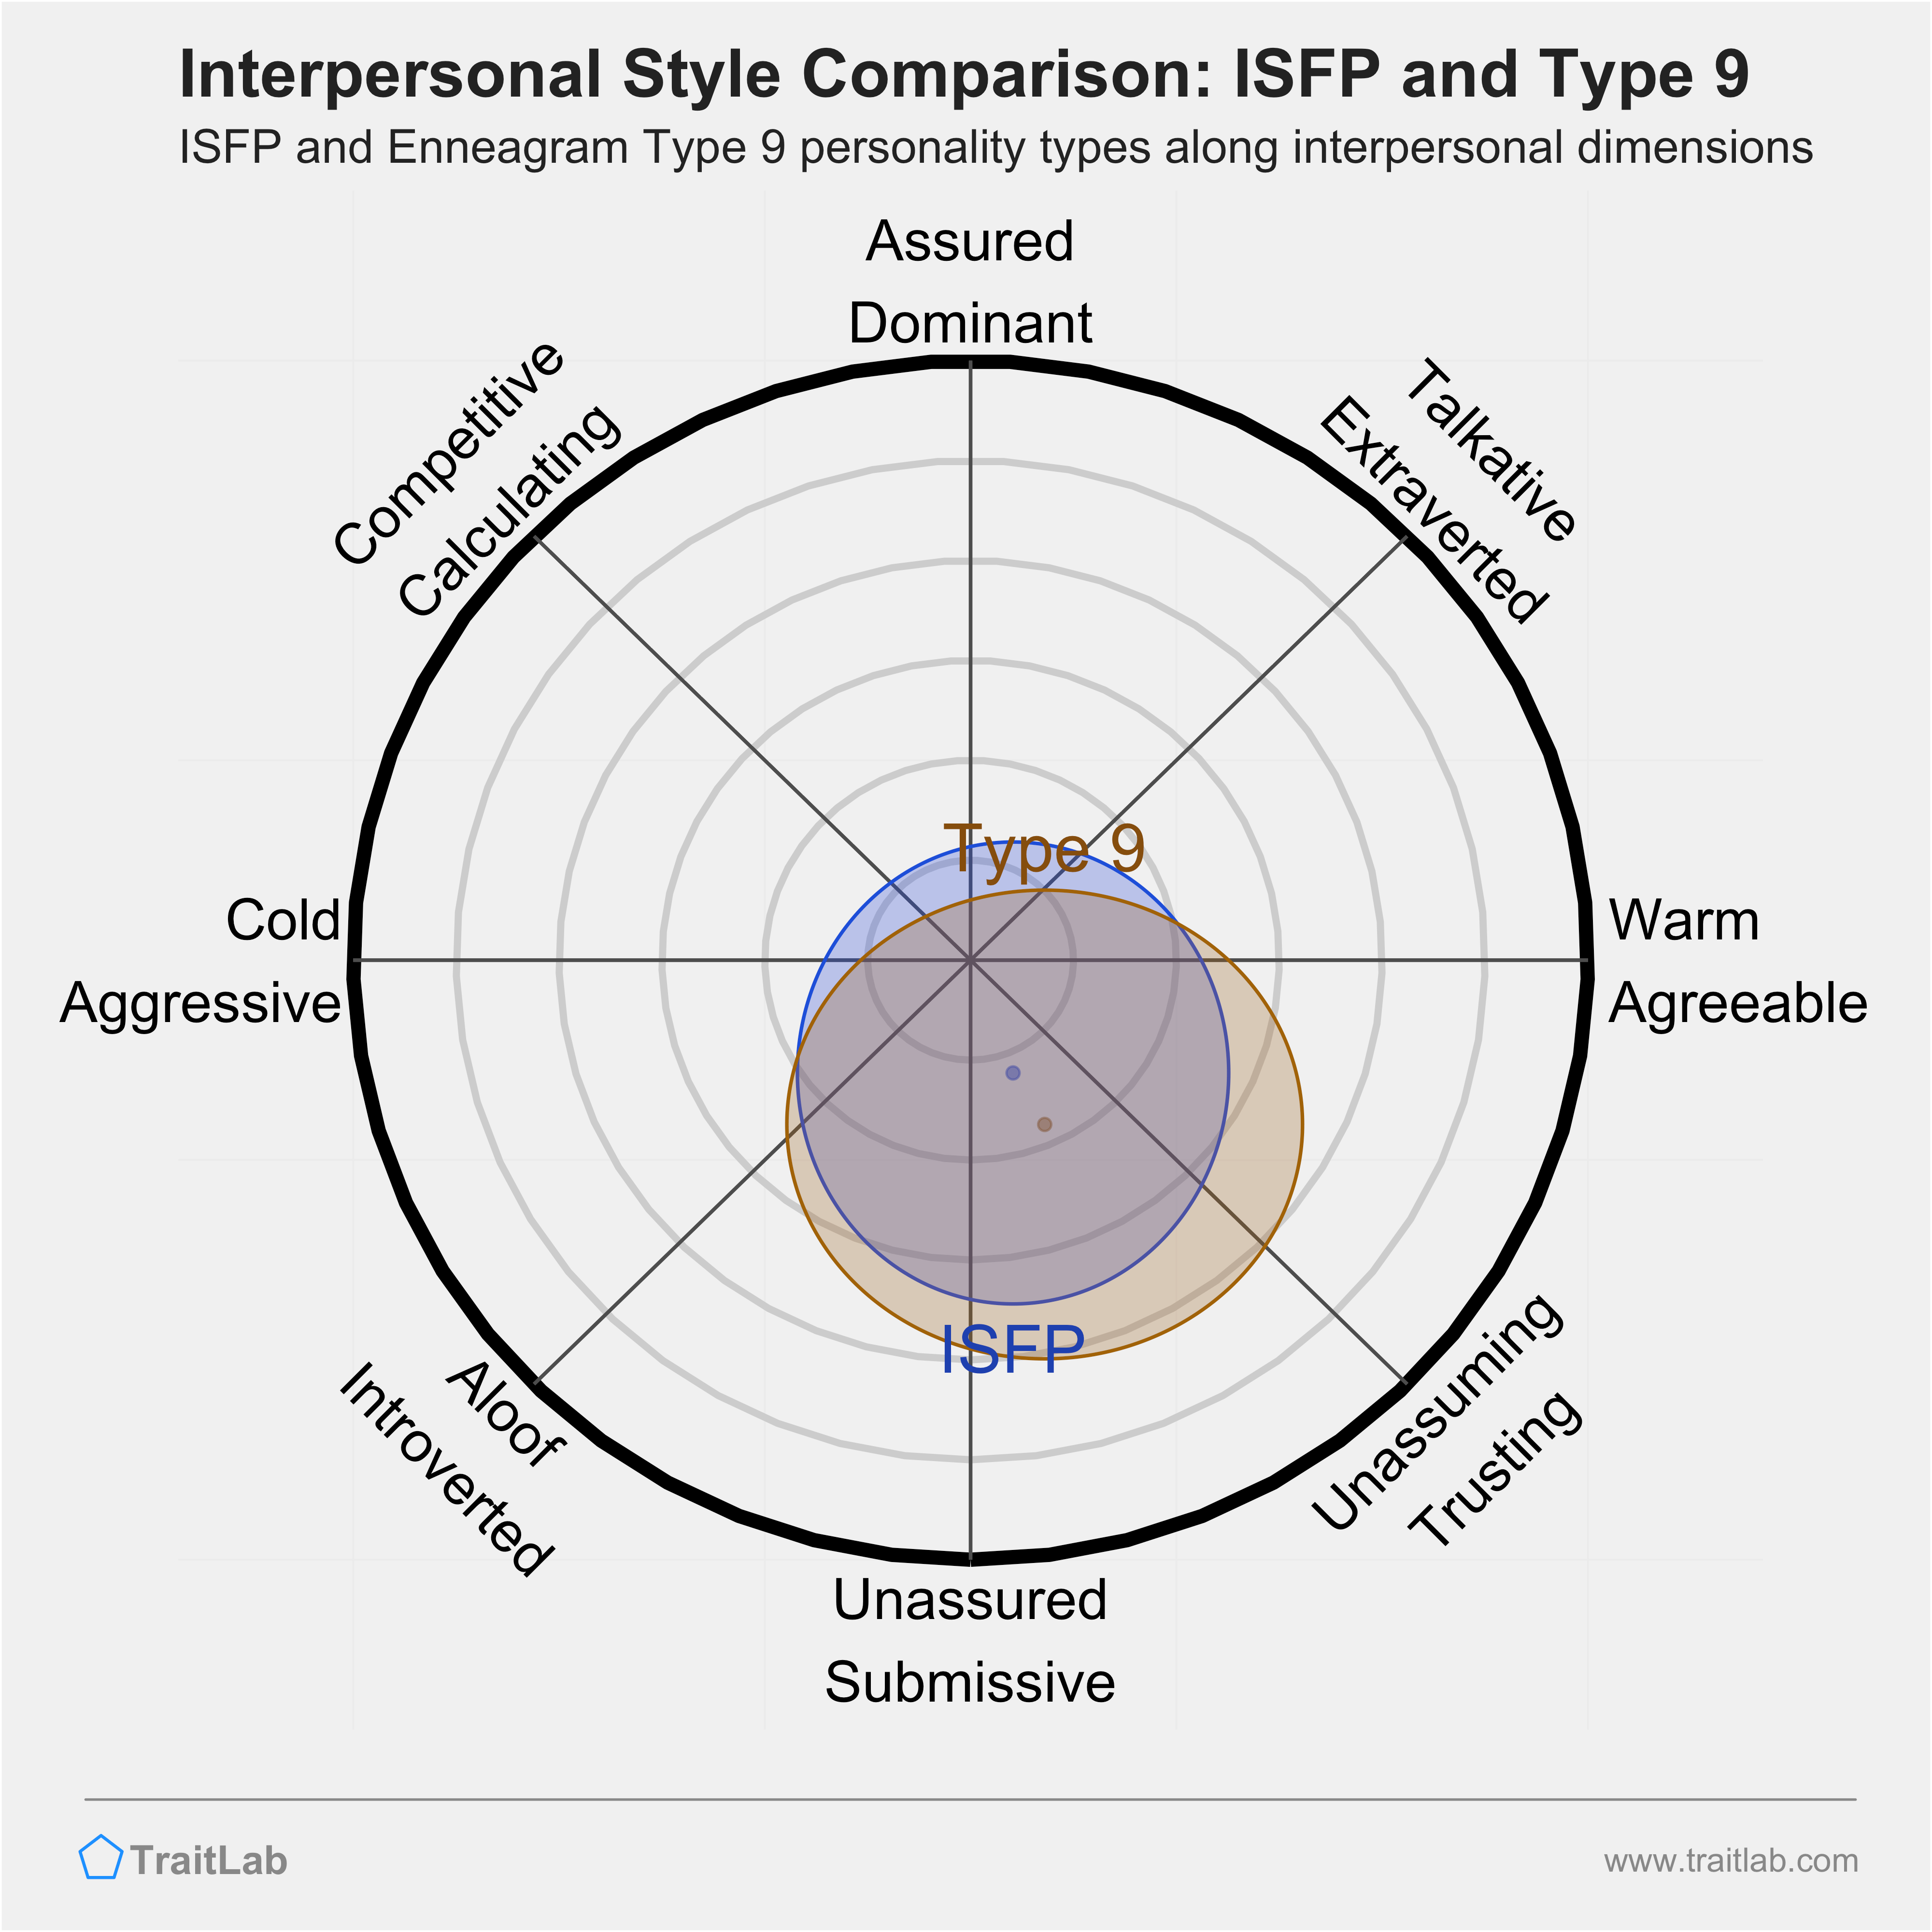 Enneagram ISFP and Type 9 comparison across interpersonal dimensions